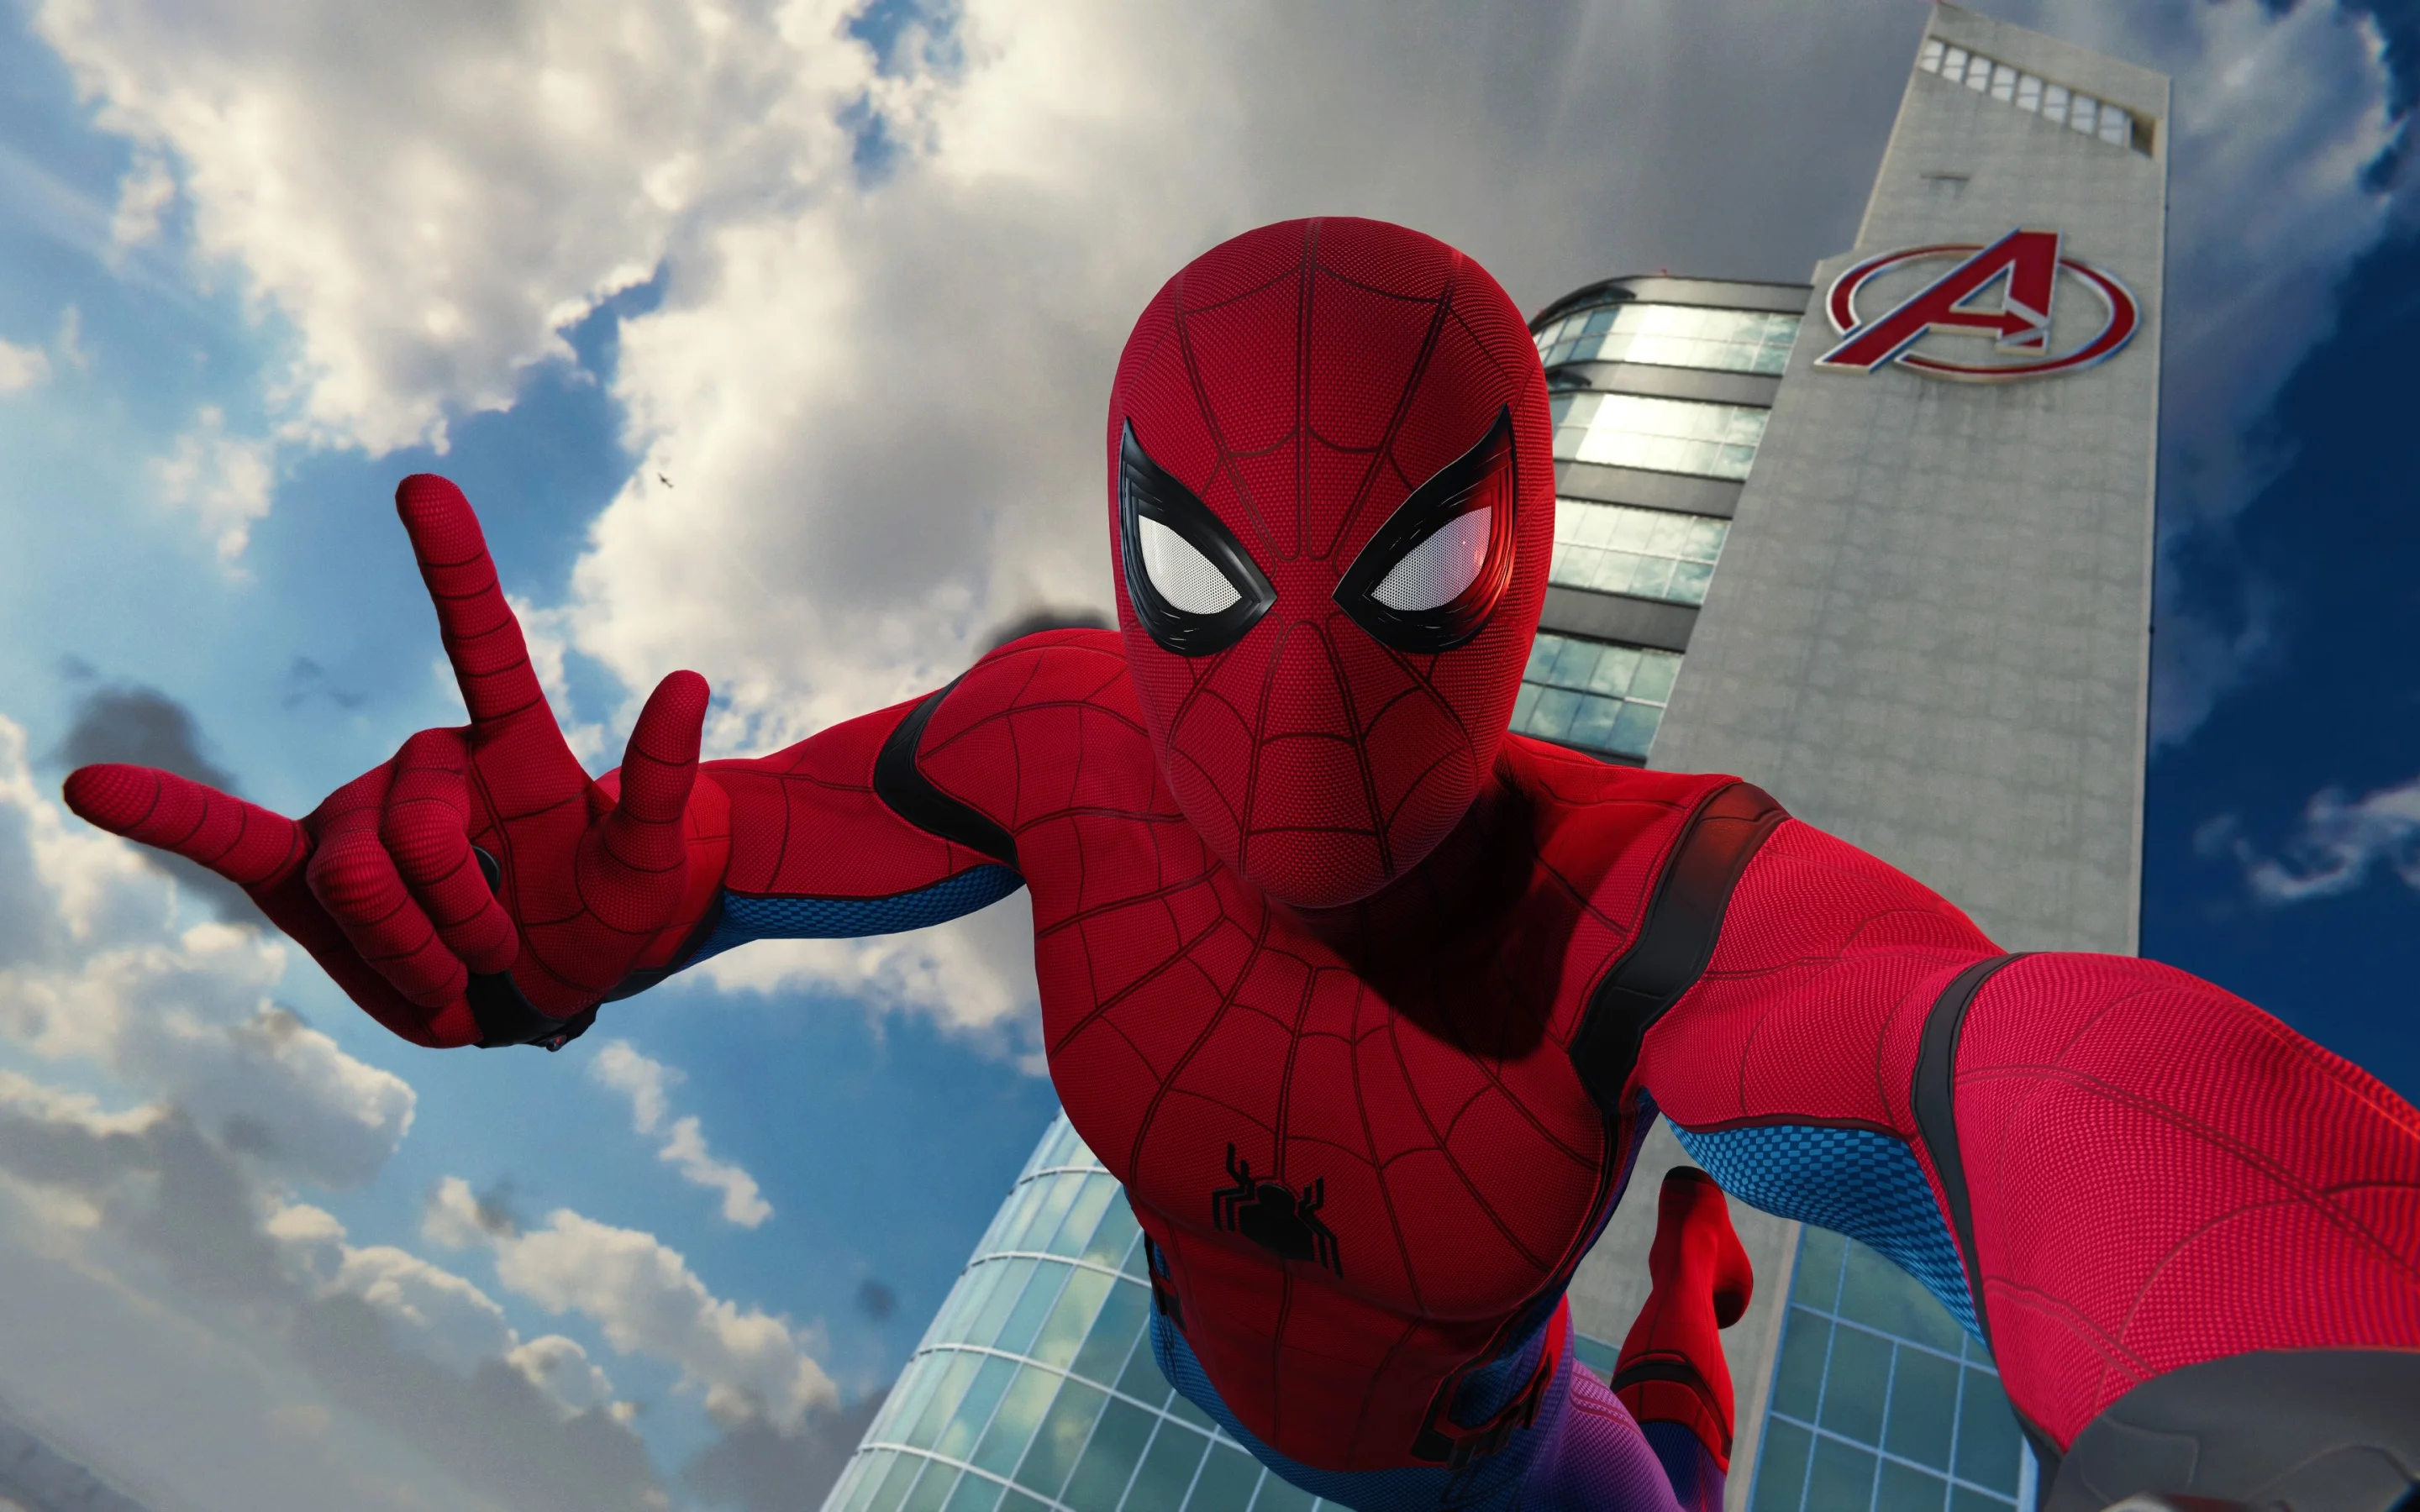 The Marvel's Spider-Man 2 universe may have its own Avengers